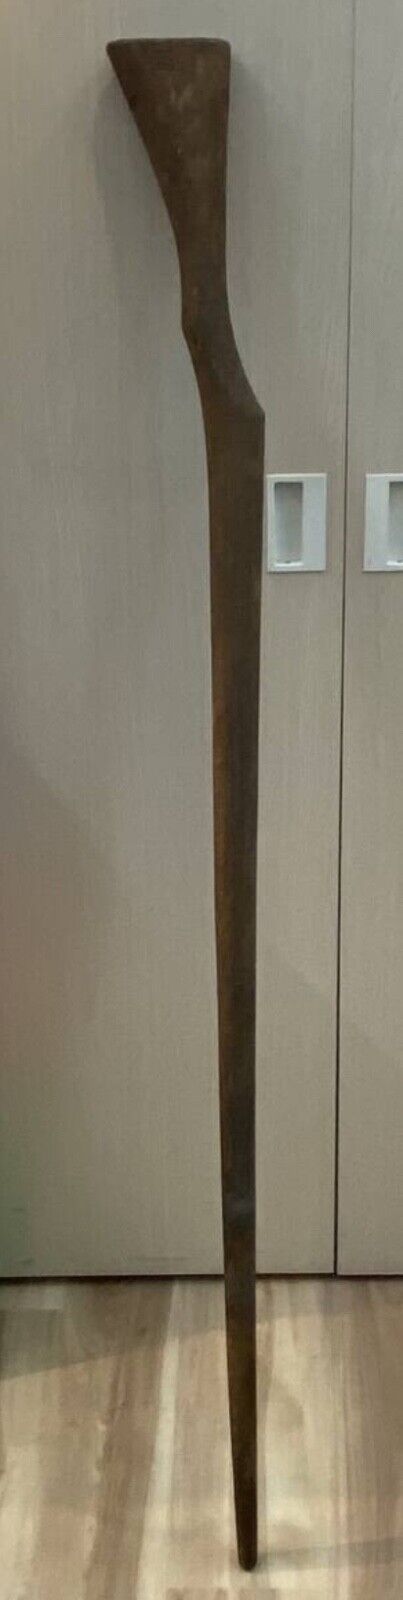 WWII Imperial Japanese Army Arisaka Rifle Shaped Training Wooden Stick